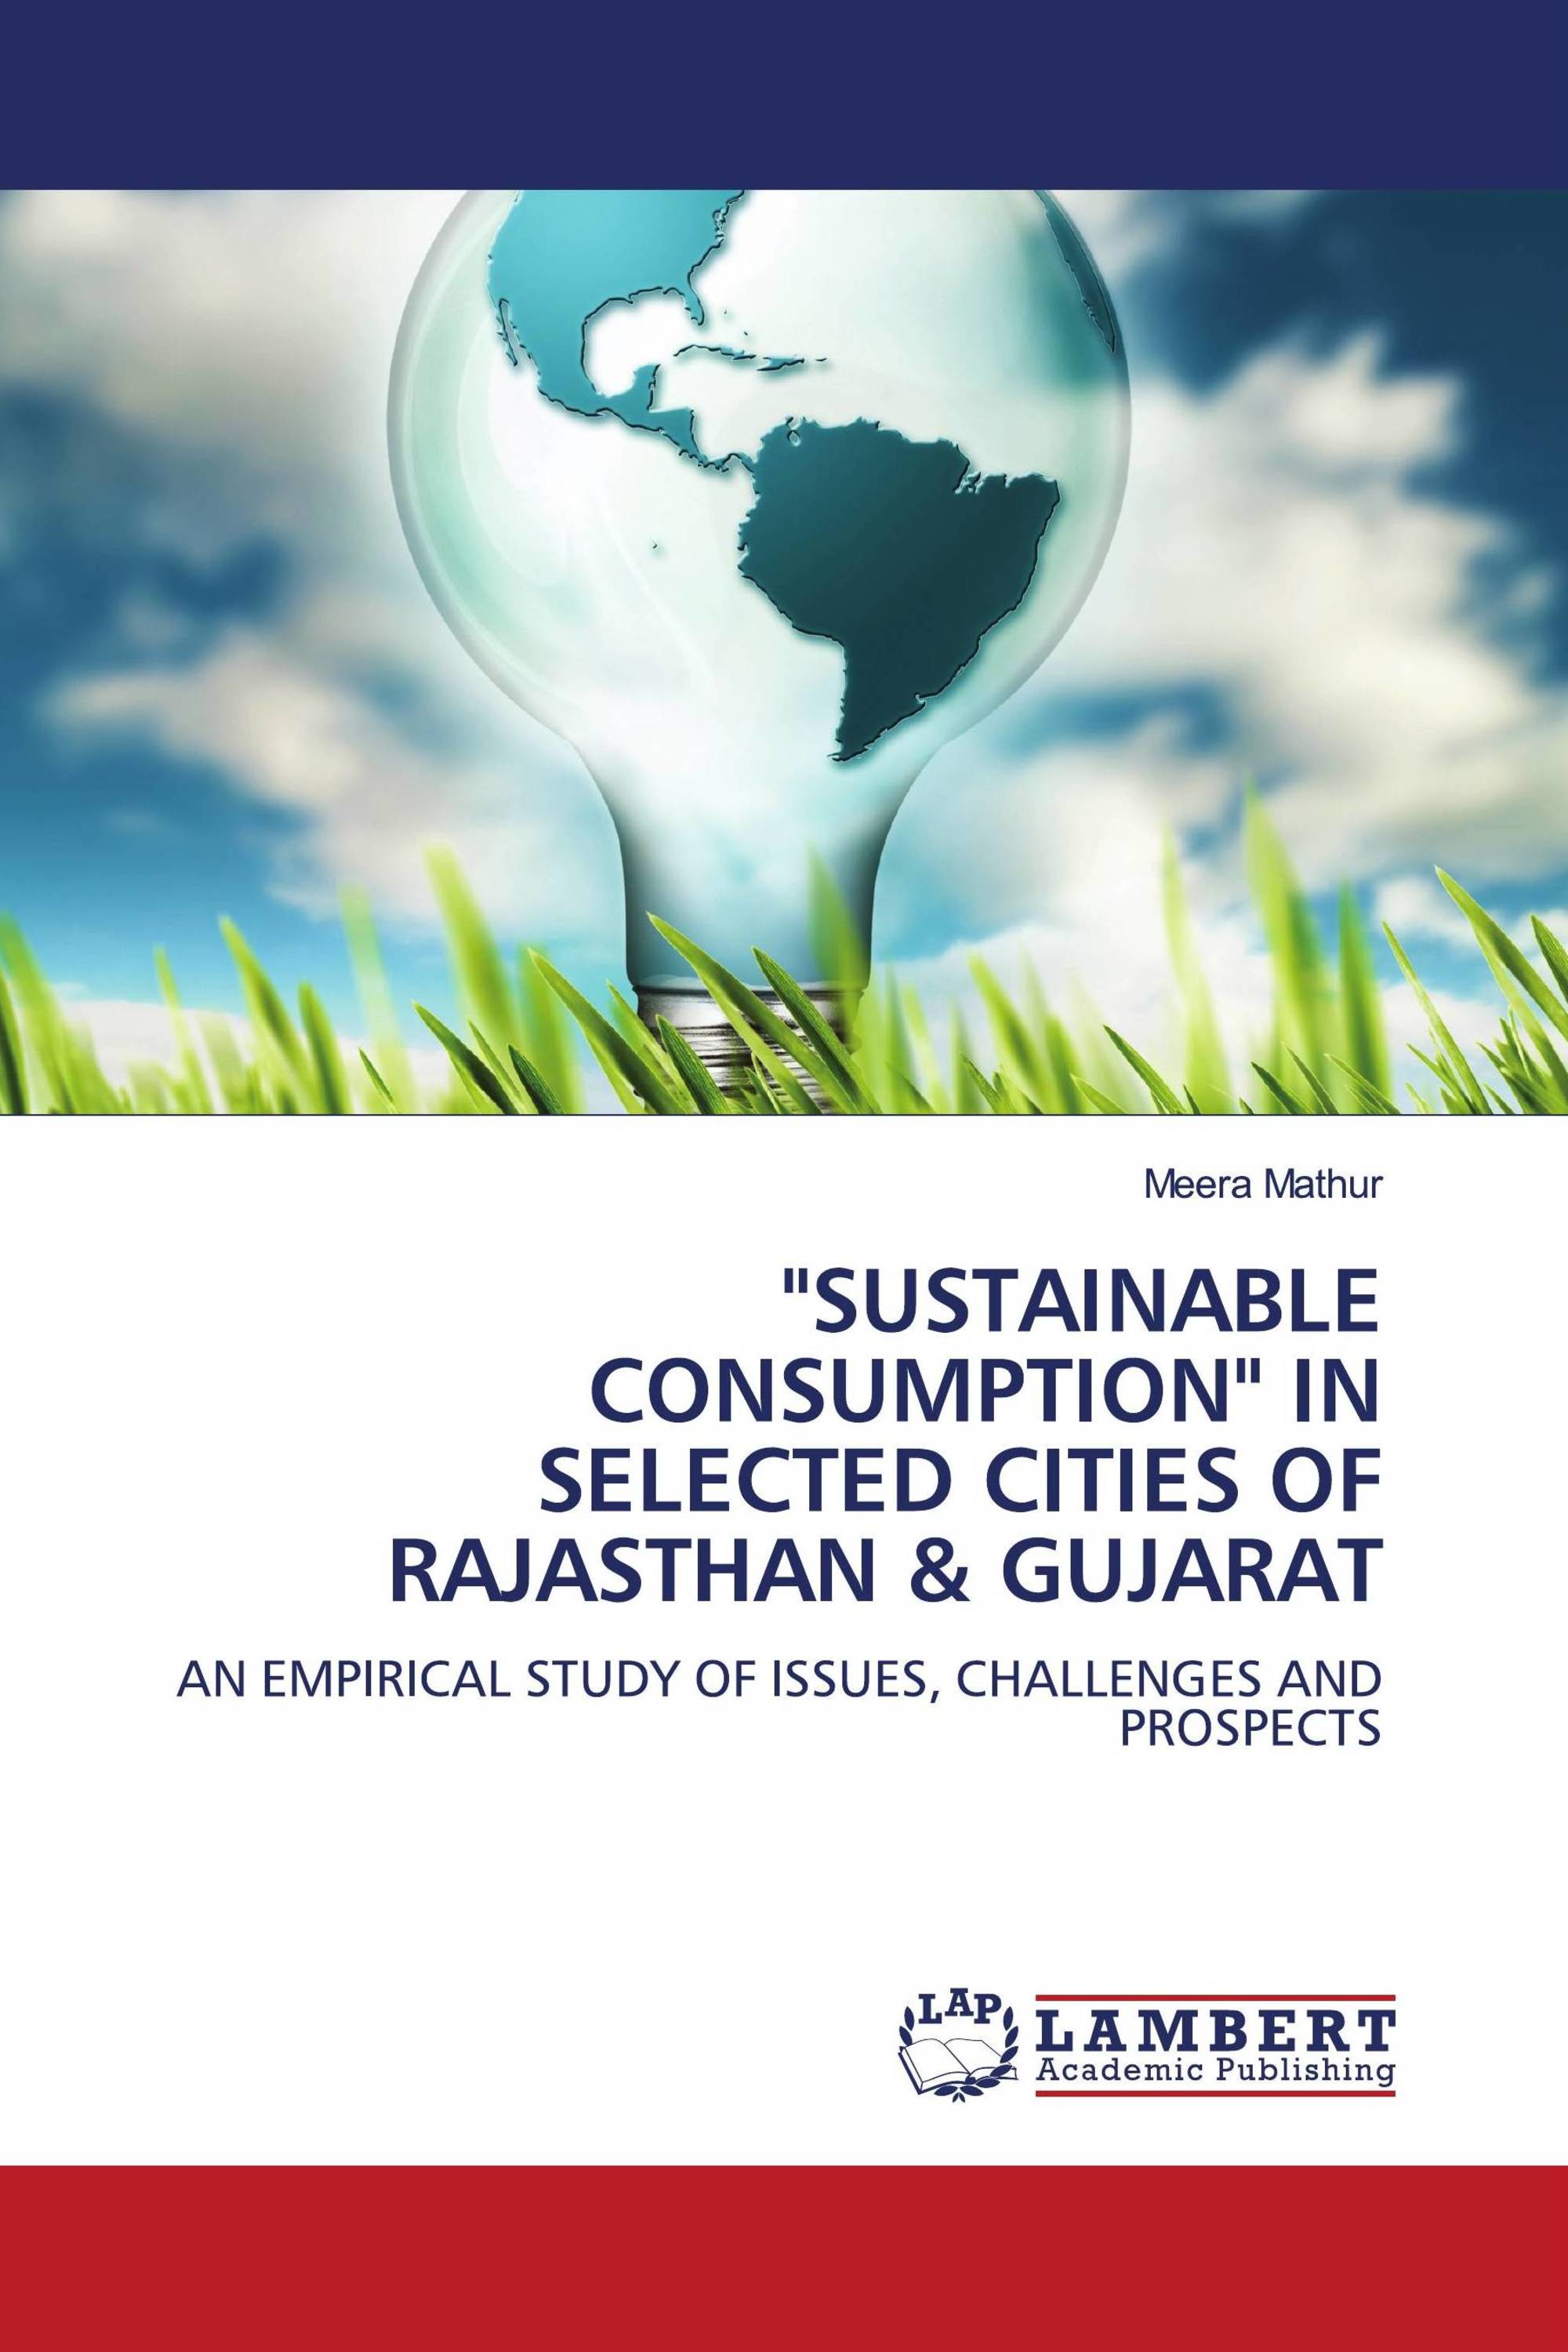 "SUSTAINABLE CONSUMPTION" IN SELECTED CITIES OF RAJASTHAN & GUJARAT